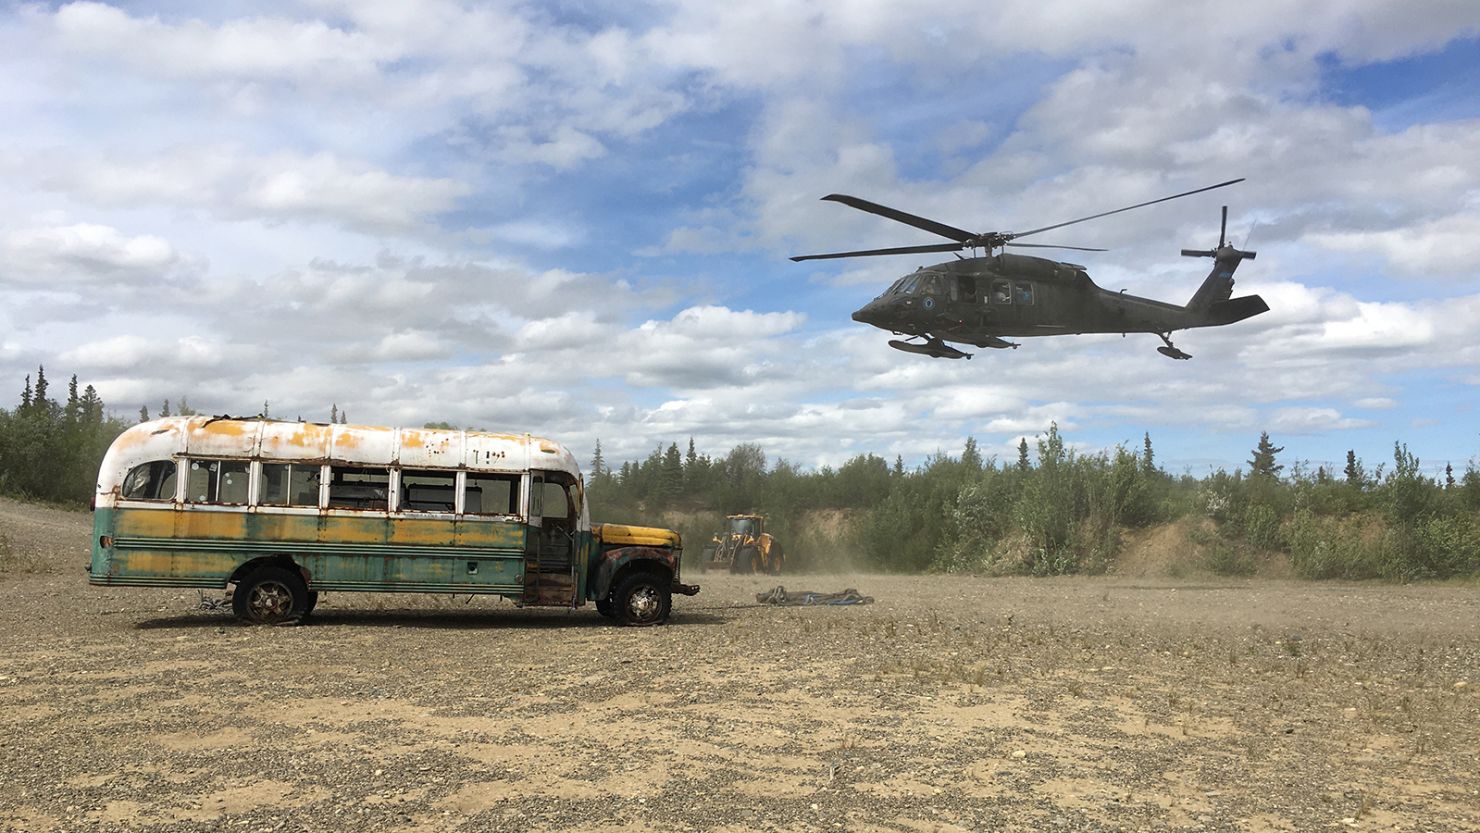 HEALY, AK - JUNE 18: In this handout provided by the to Alaska Department of Natural Resources, the Alaska Army National Guard transports "Bus 142", a 1940s-era Fairbanks city bus,  from its longtime resting place on the Stampede Trail to an interim staging point on the Stampede Road on June 18, 2020 25 miles west of Healy, Alaska. The Department of Natural Resources decided to move the bus in response to continuing and significant public safety hazards, injuries, and deaths related to the bus. Used since as an emergency shelter, it became well-known after Jon Krakauer's 1996 book "Into the Wild" and a 2007 movie with the same name popularized the story of 24-year-old wanderer Chris McCandless, who sadly died there alone in 1992 after a 114-day stay. (Photo by Alaska Department of Natural Resources via Getty Images)